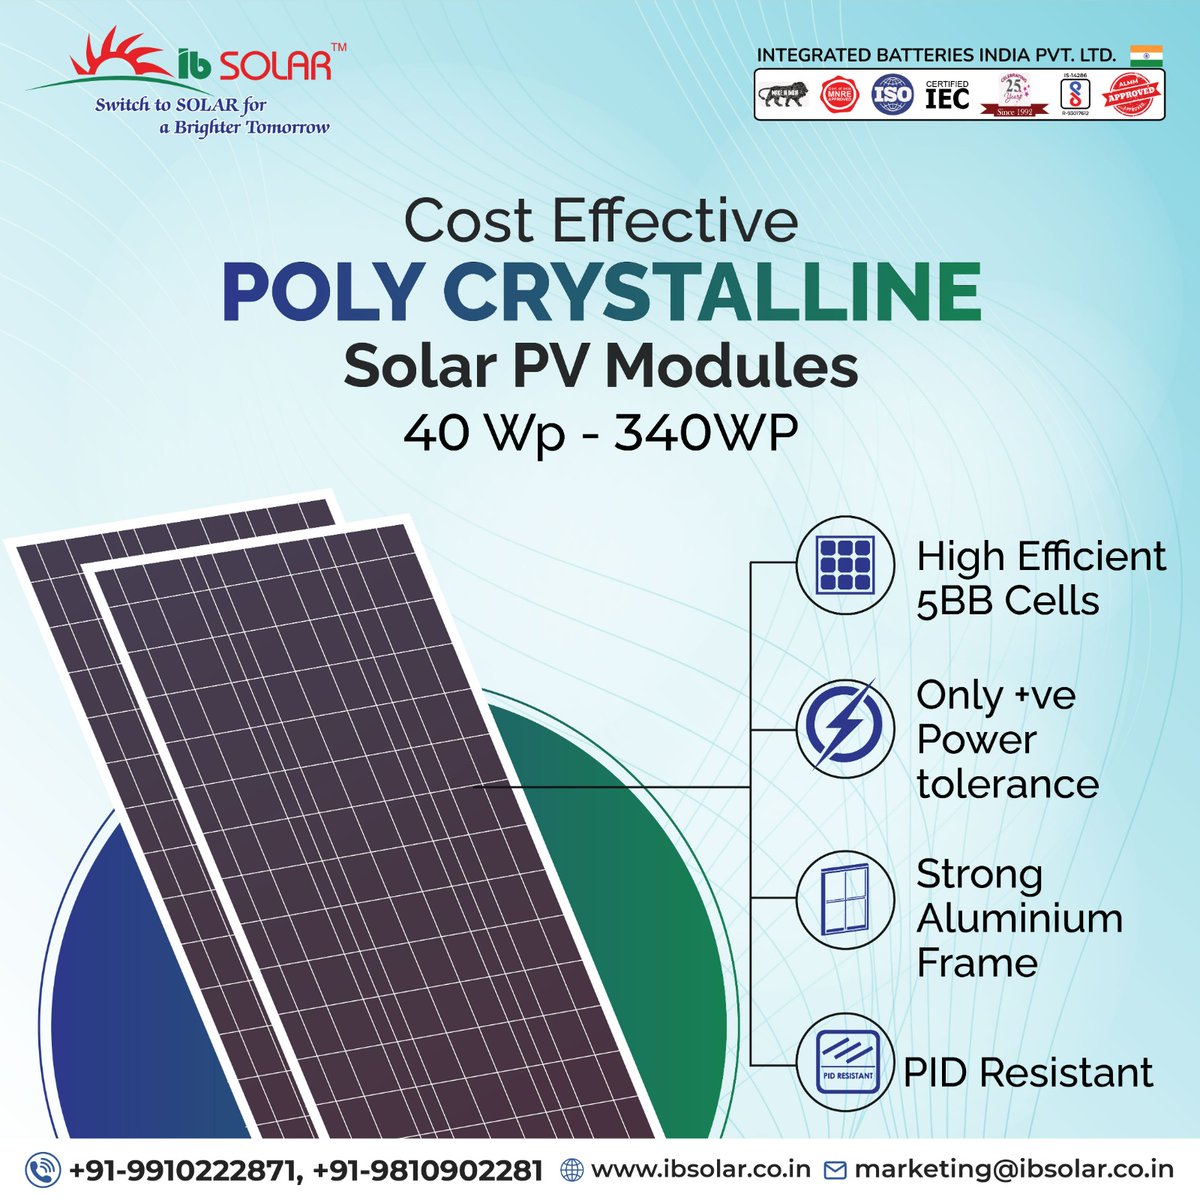 Cost-effective and IB's Best Seller Poly crystalline solar panels preferred by many Indian state government

Place order at:
Visit: ibsolar.co.in
Or call us at +919910222871, 9810902281

#solarindia #ibsolar #mono #monopanels #polypanels #bis #almm #almmapproved